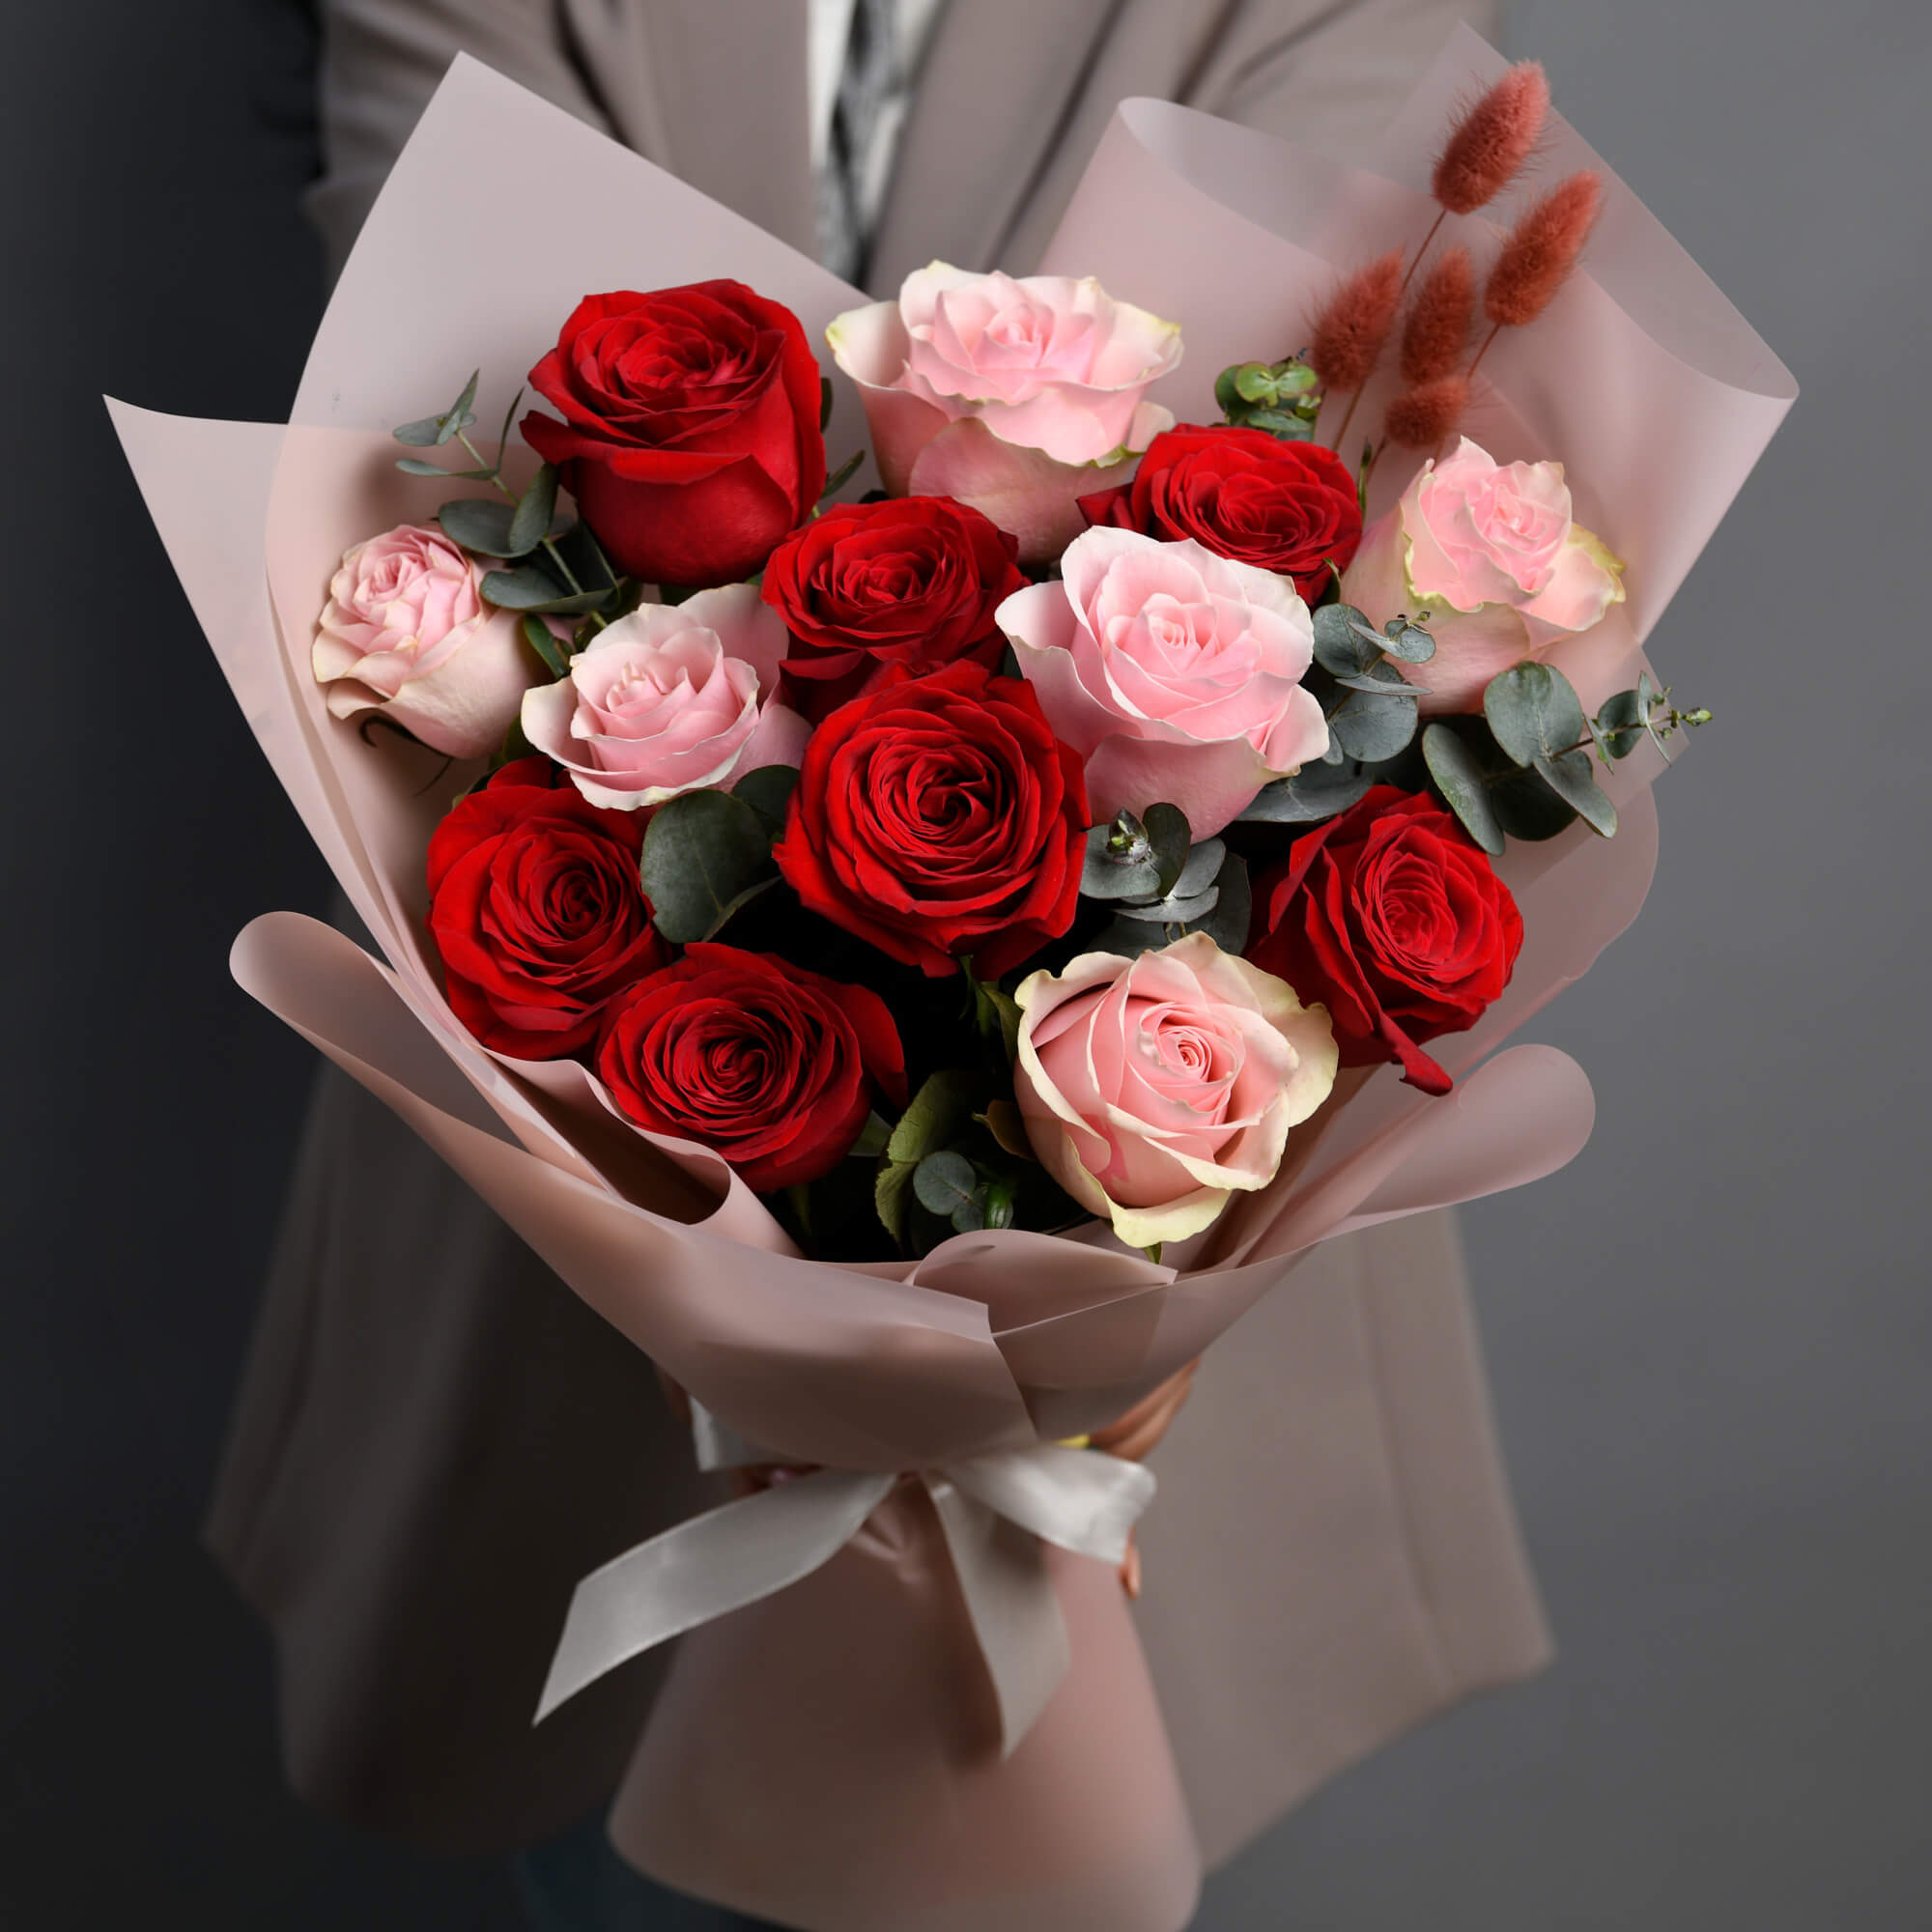 Bouquet of 13 red and pink roses